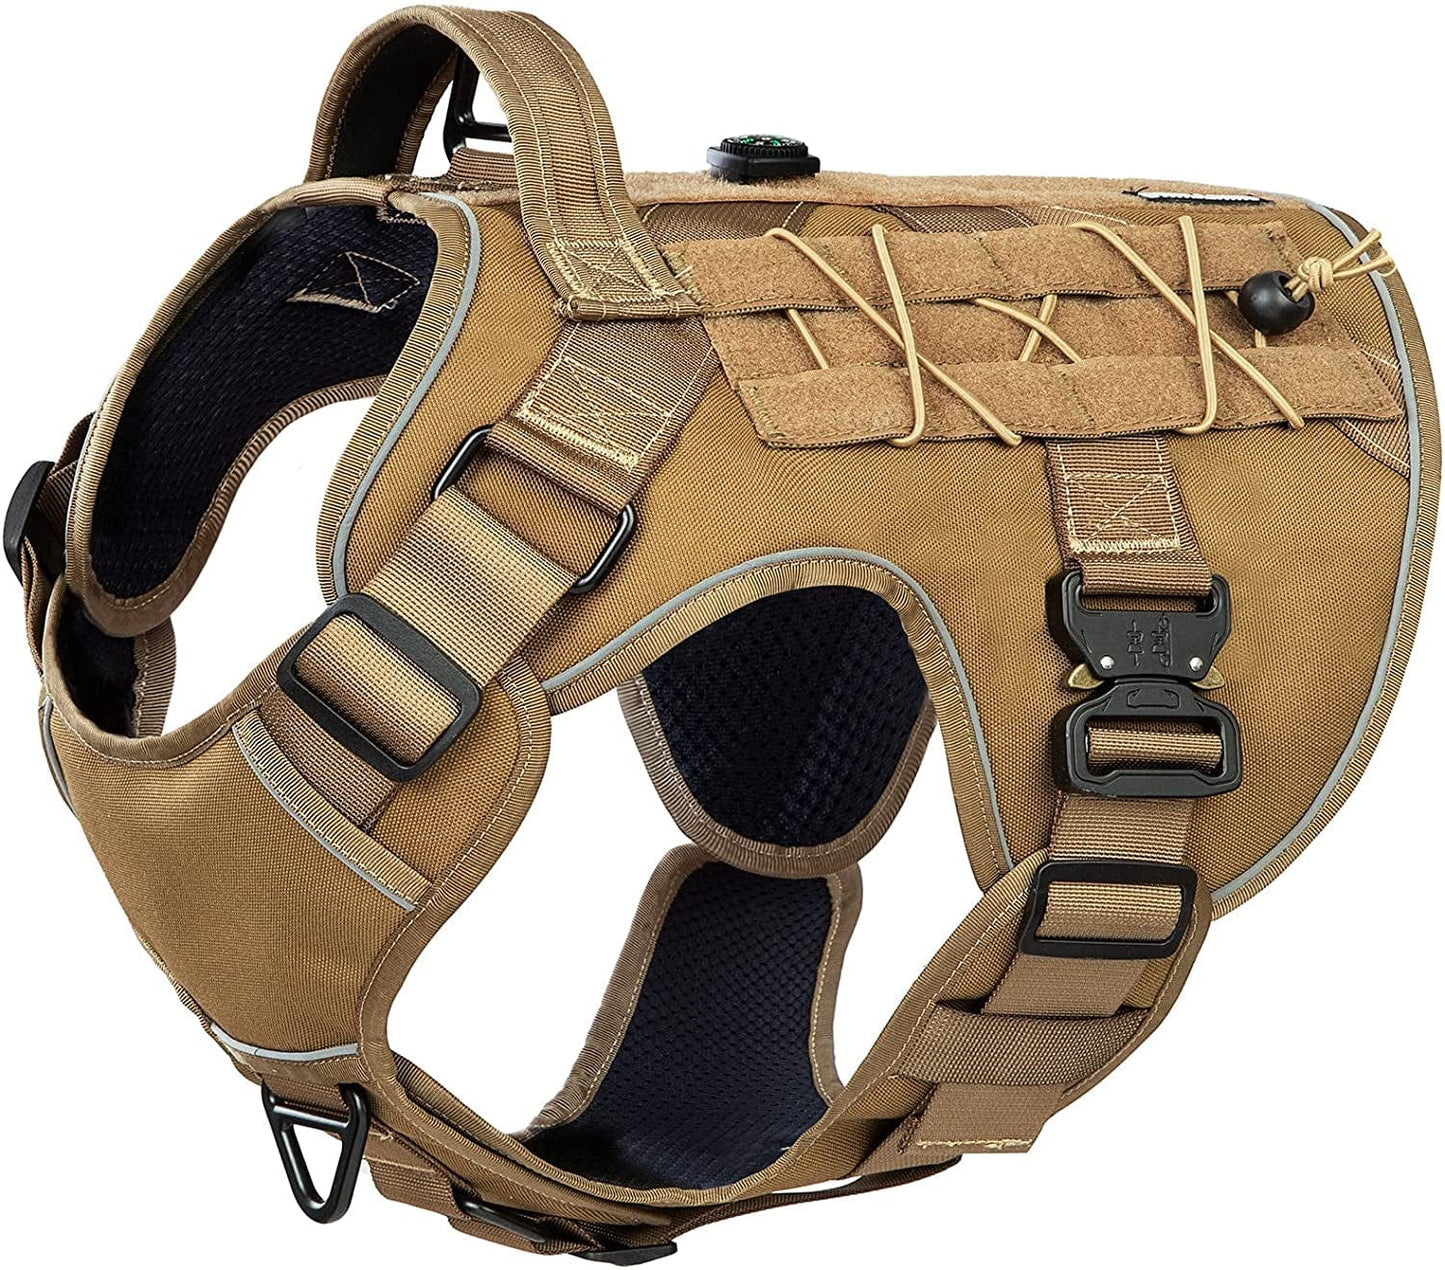 DNALLRINO Tactical Dog Harness for Large Medium Dogs, Heavy Duty Military Dog Harness with Handle, Adjustable No Pull Service Dog Harness with Molle & Loop Panels for Hiking Walking Training Animals & Pet Supplies > Pet Supplies > Dog Supplies > Dog Apparel Dnallrino A Coyote Brown XL (Neck: 21" - 29", Chest: 30"-43") 